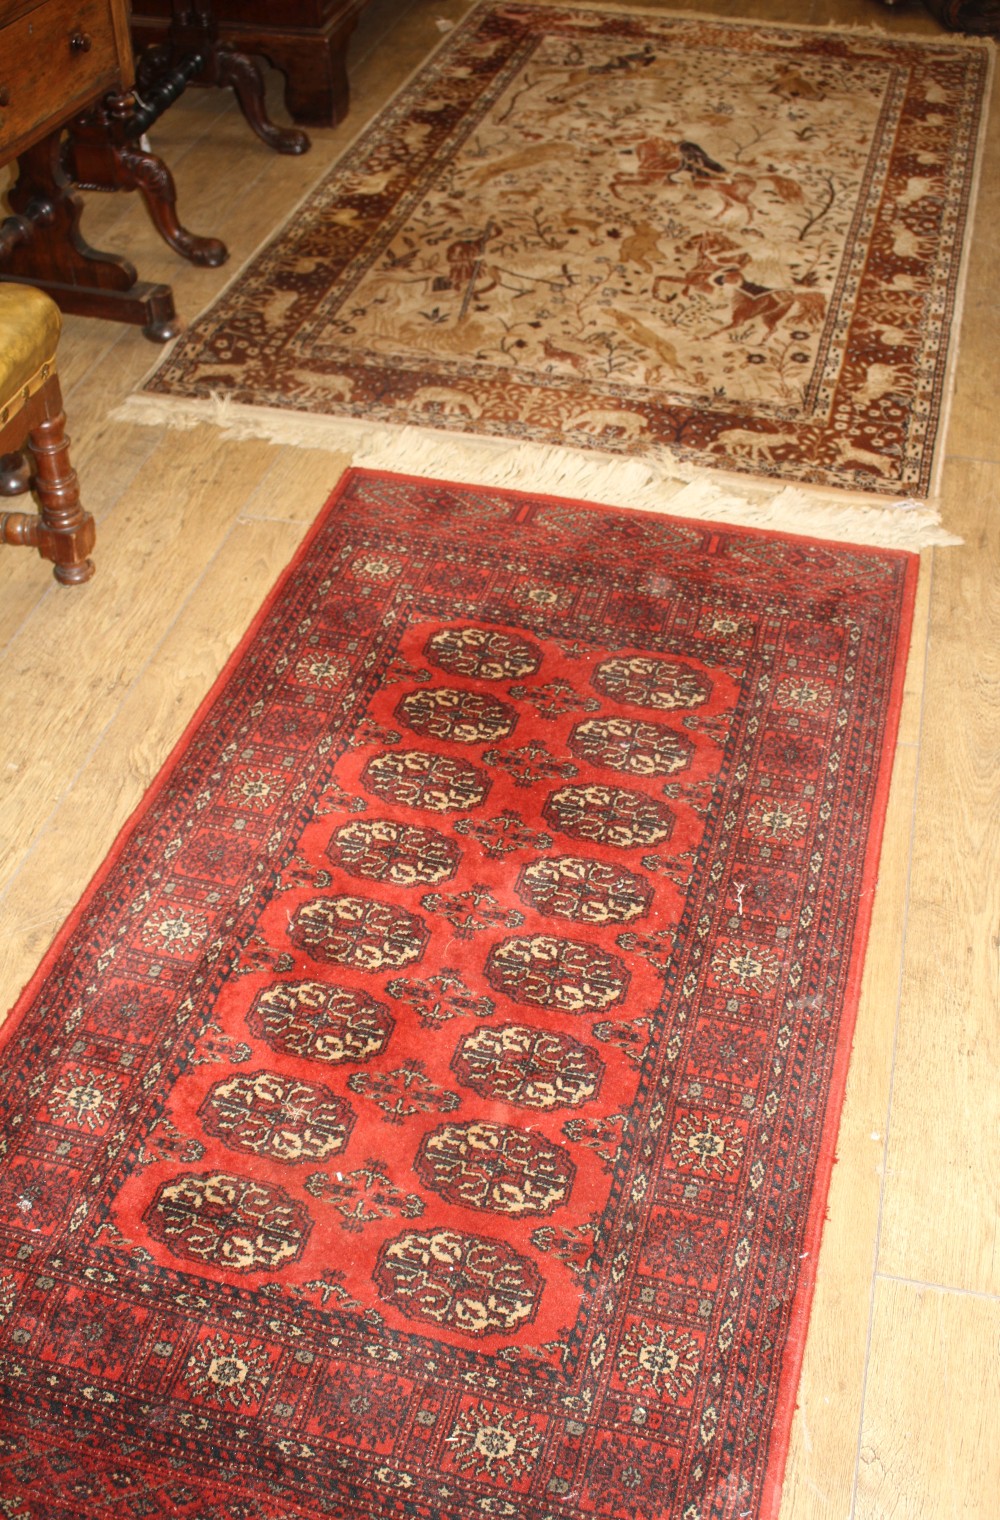 A Meshed machined wool rug, 190 x 126cm and a Bokhara machined rug, 170 x 83cm